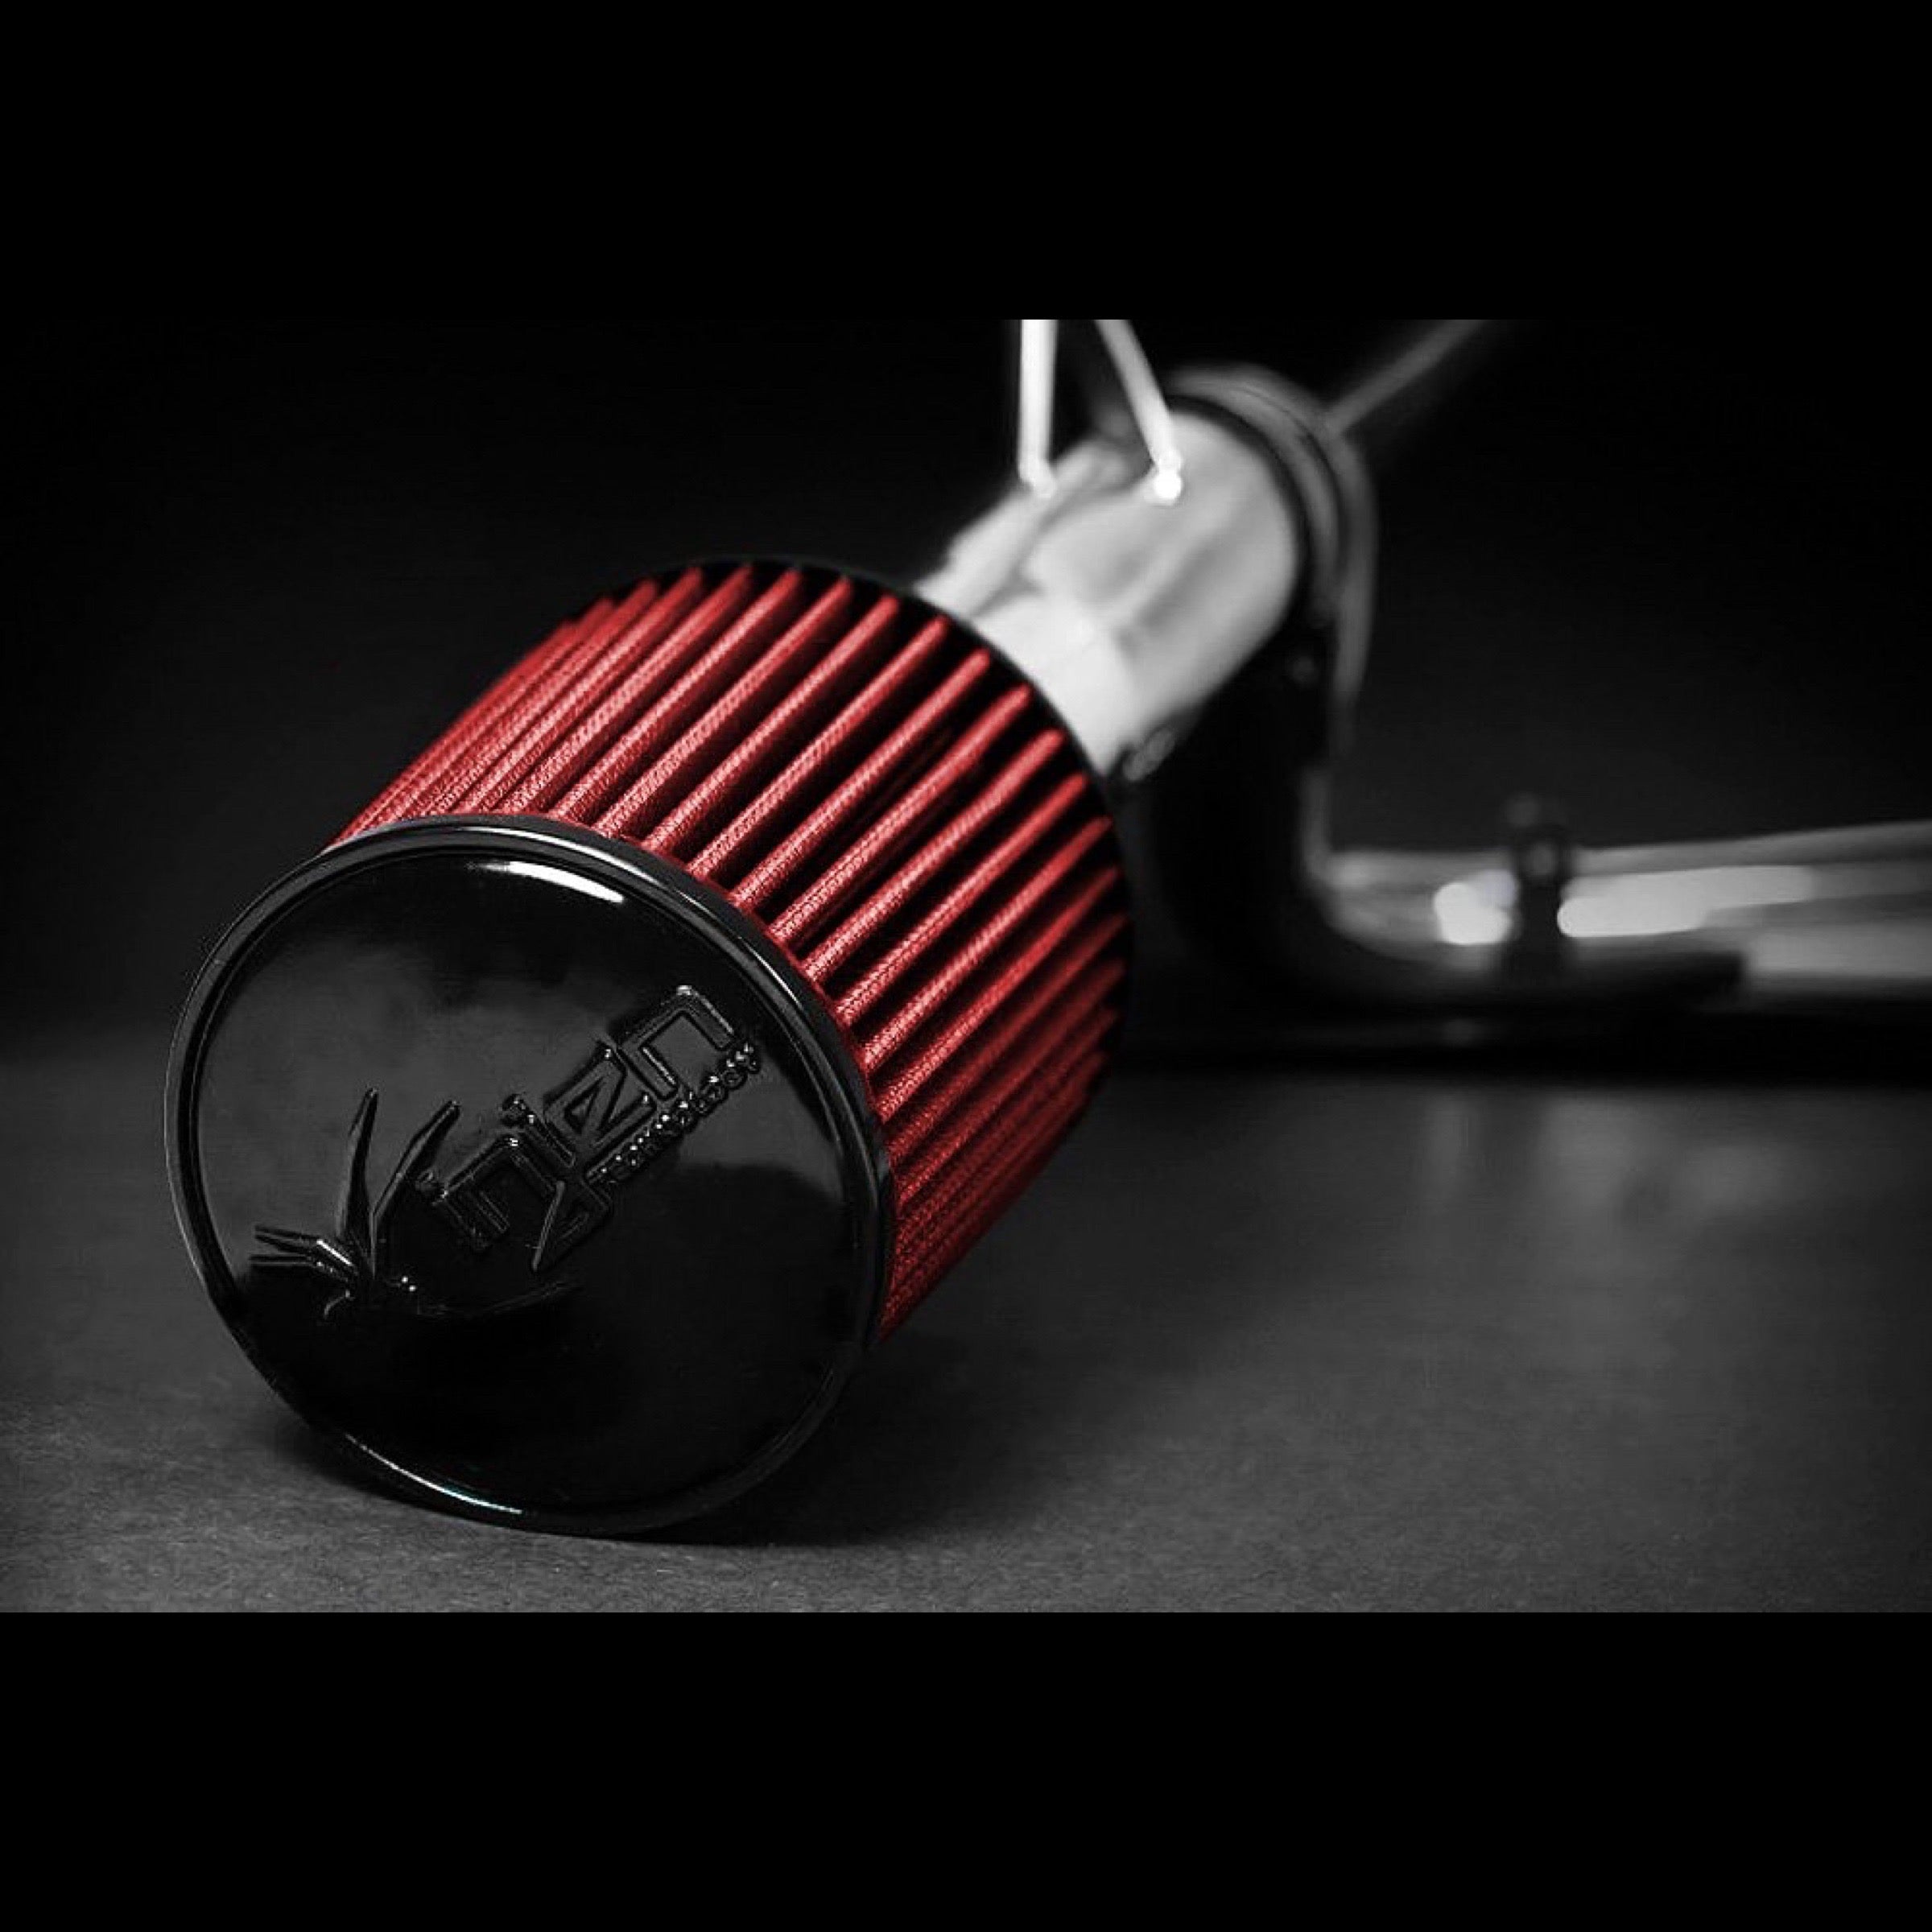 Injen Technology cold air intake with red filter and a black backdrop